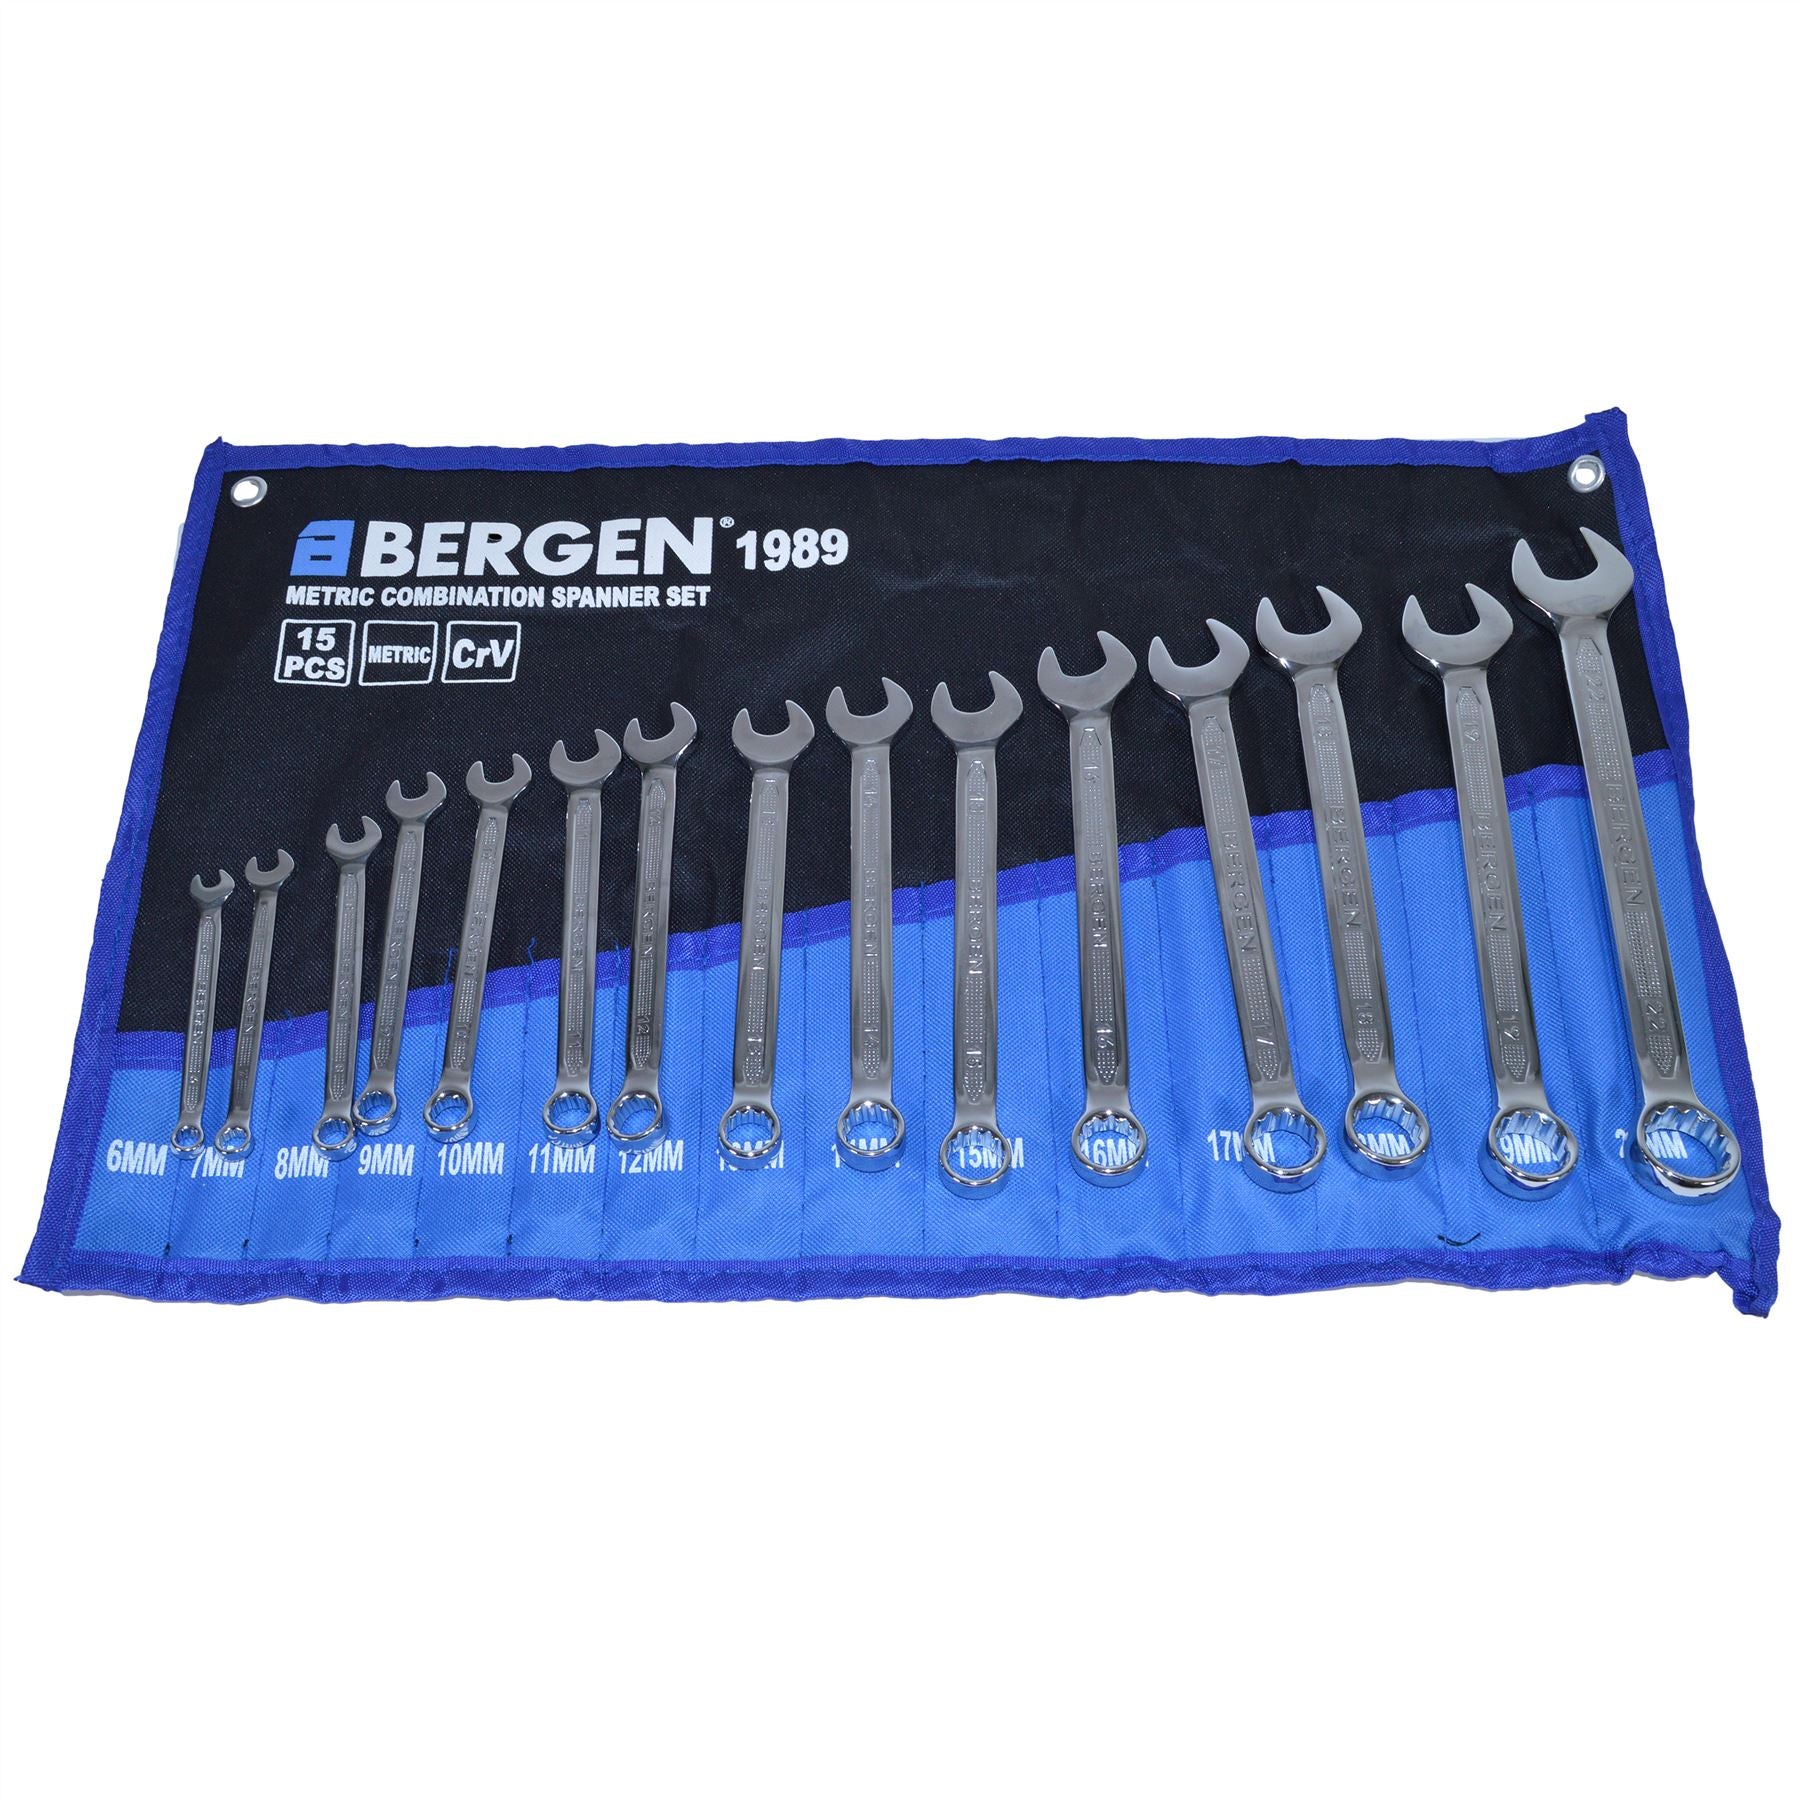 15pc Metric MM Combination Spanner Spanners Wrench Set 6mm to 22mm Bergen